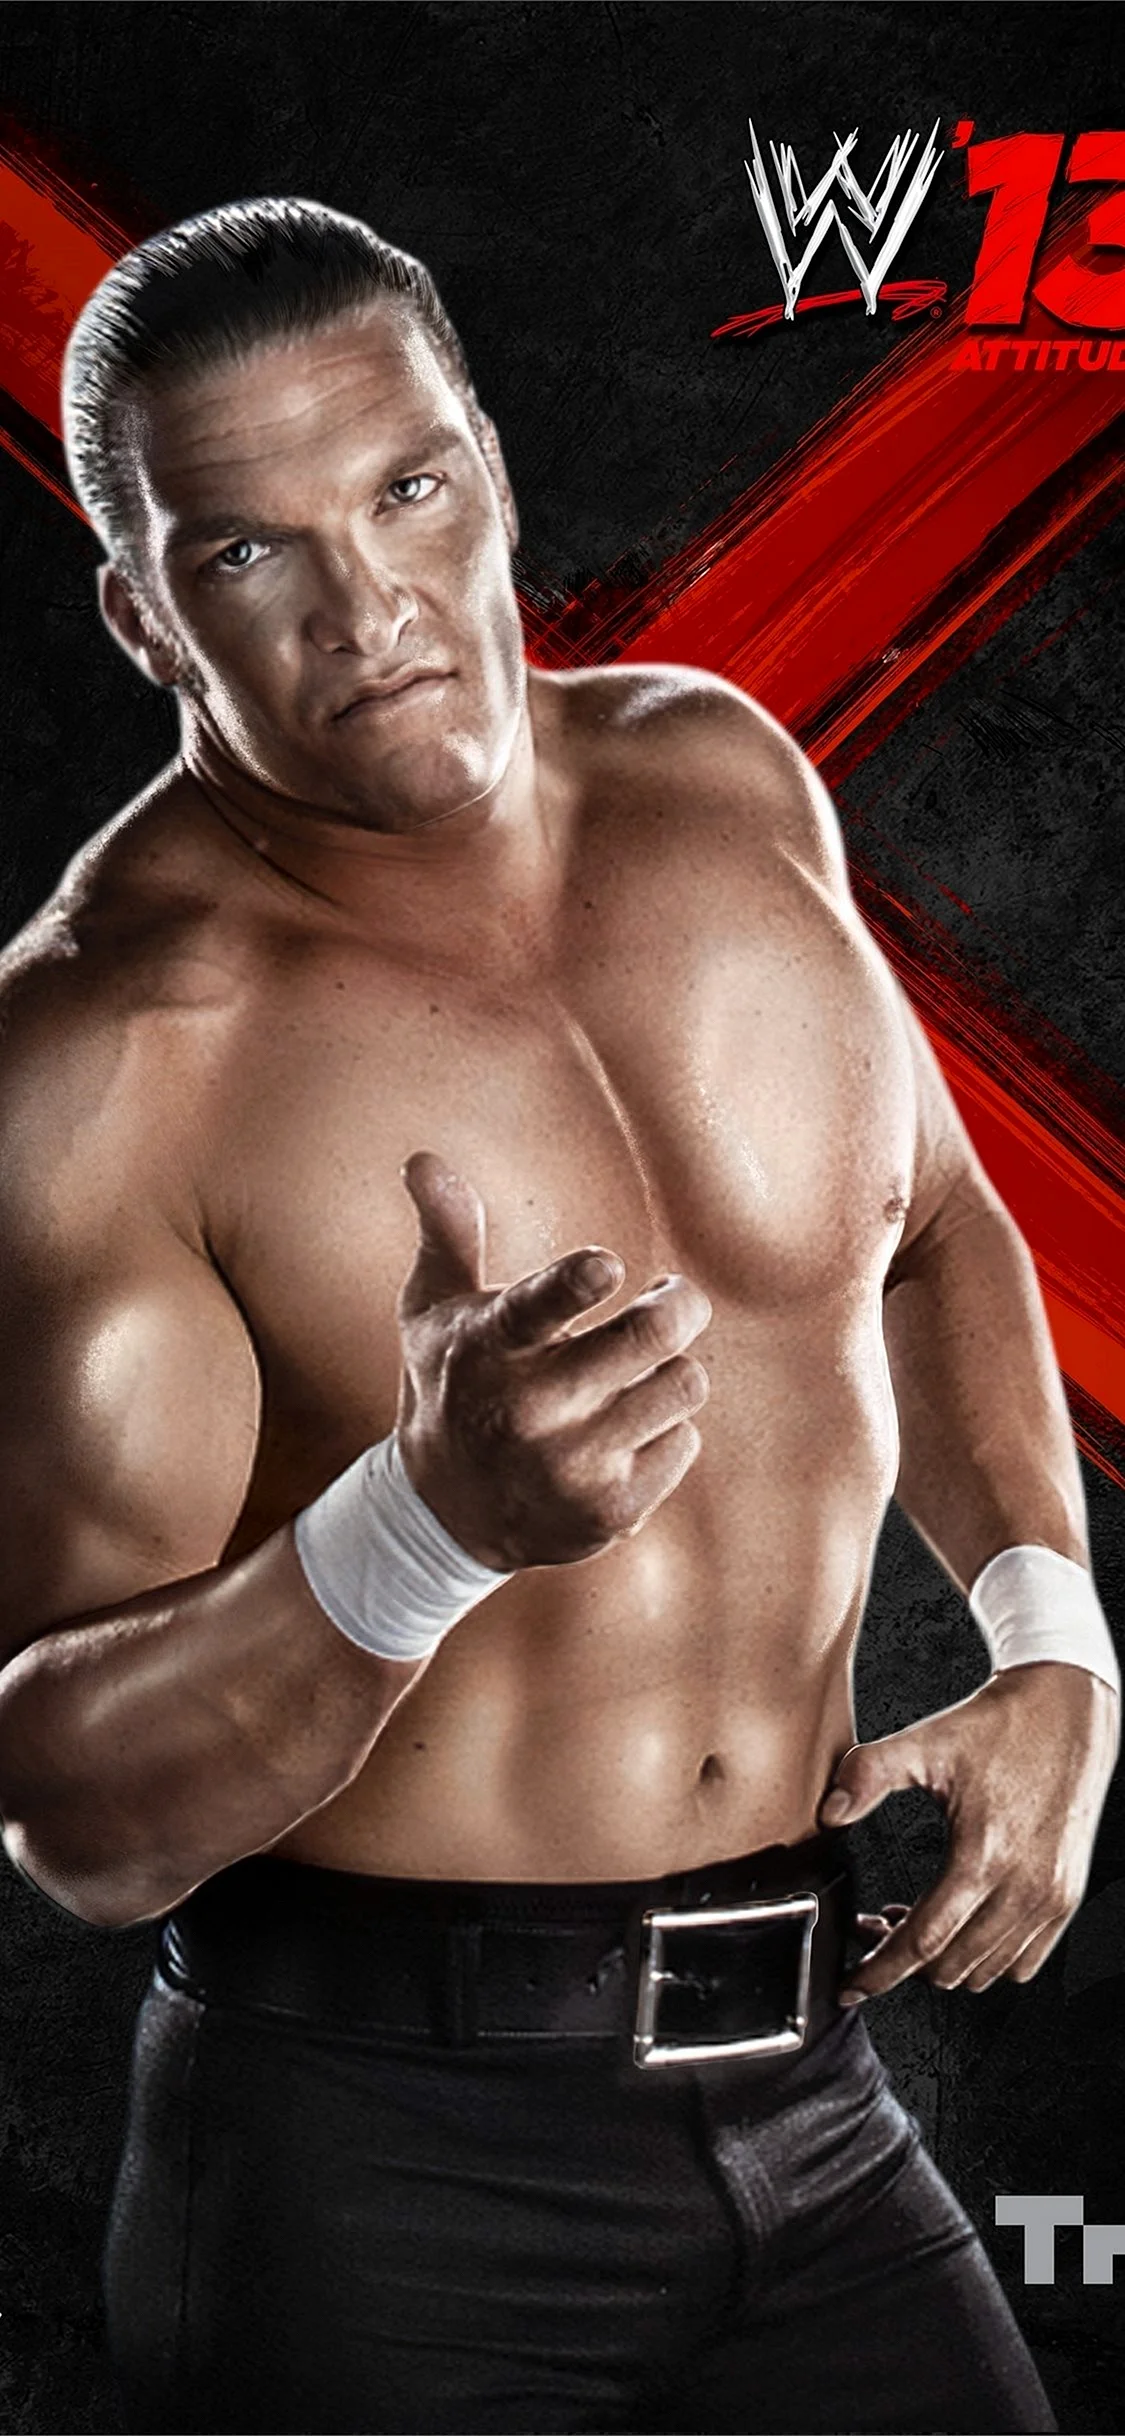 Wwe Wallpaper For iPhone